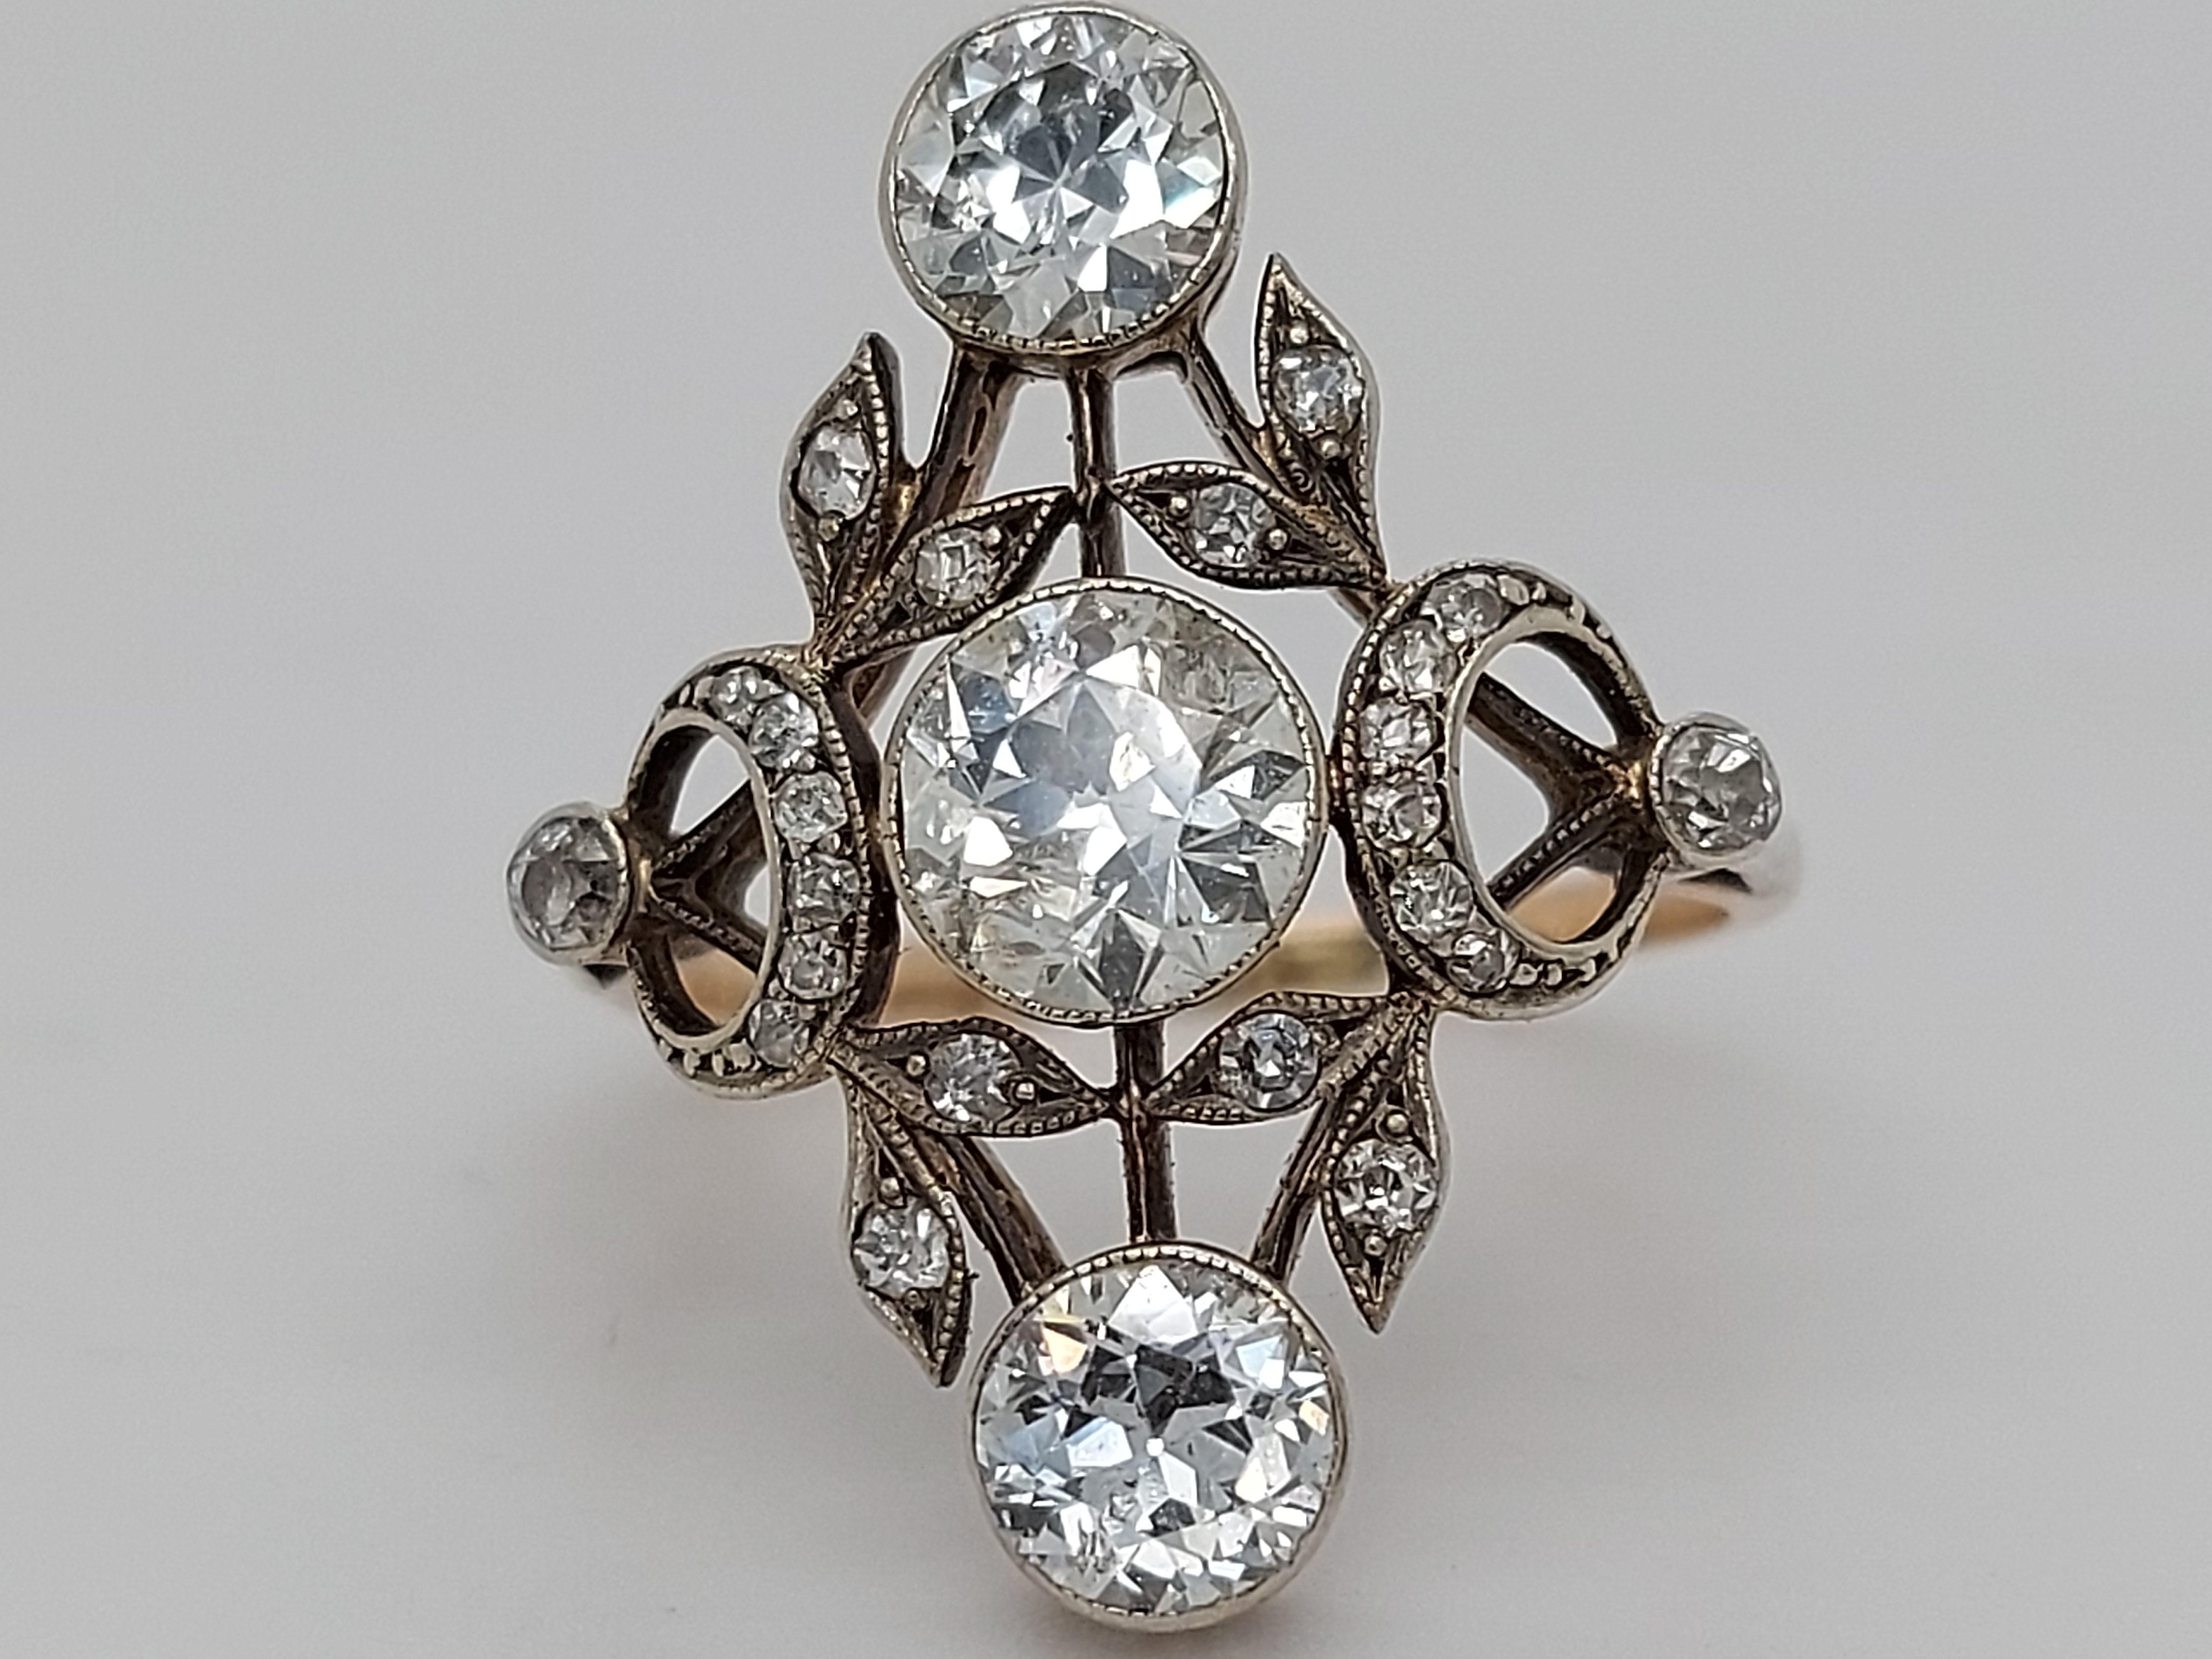 Stunning 18 Karat Gold and Silver Ring with Diamonds from the 1900s, Trilogy For Sale 3